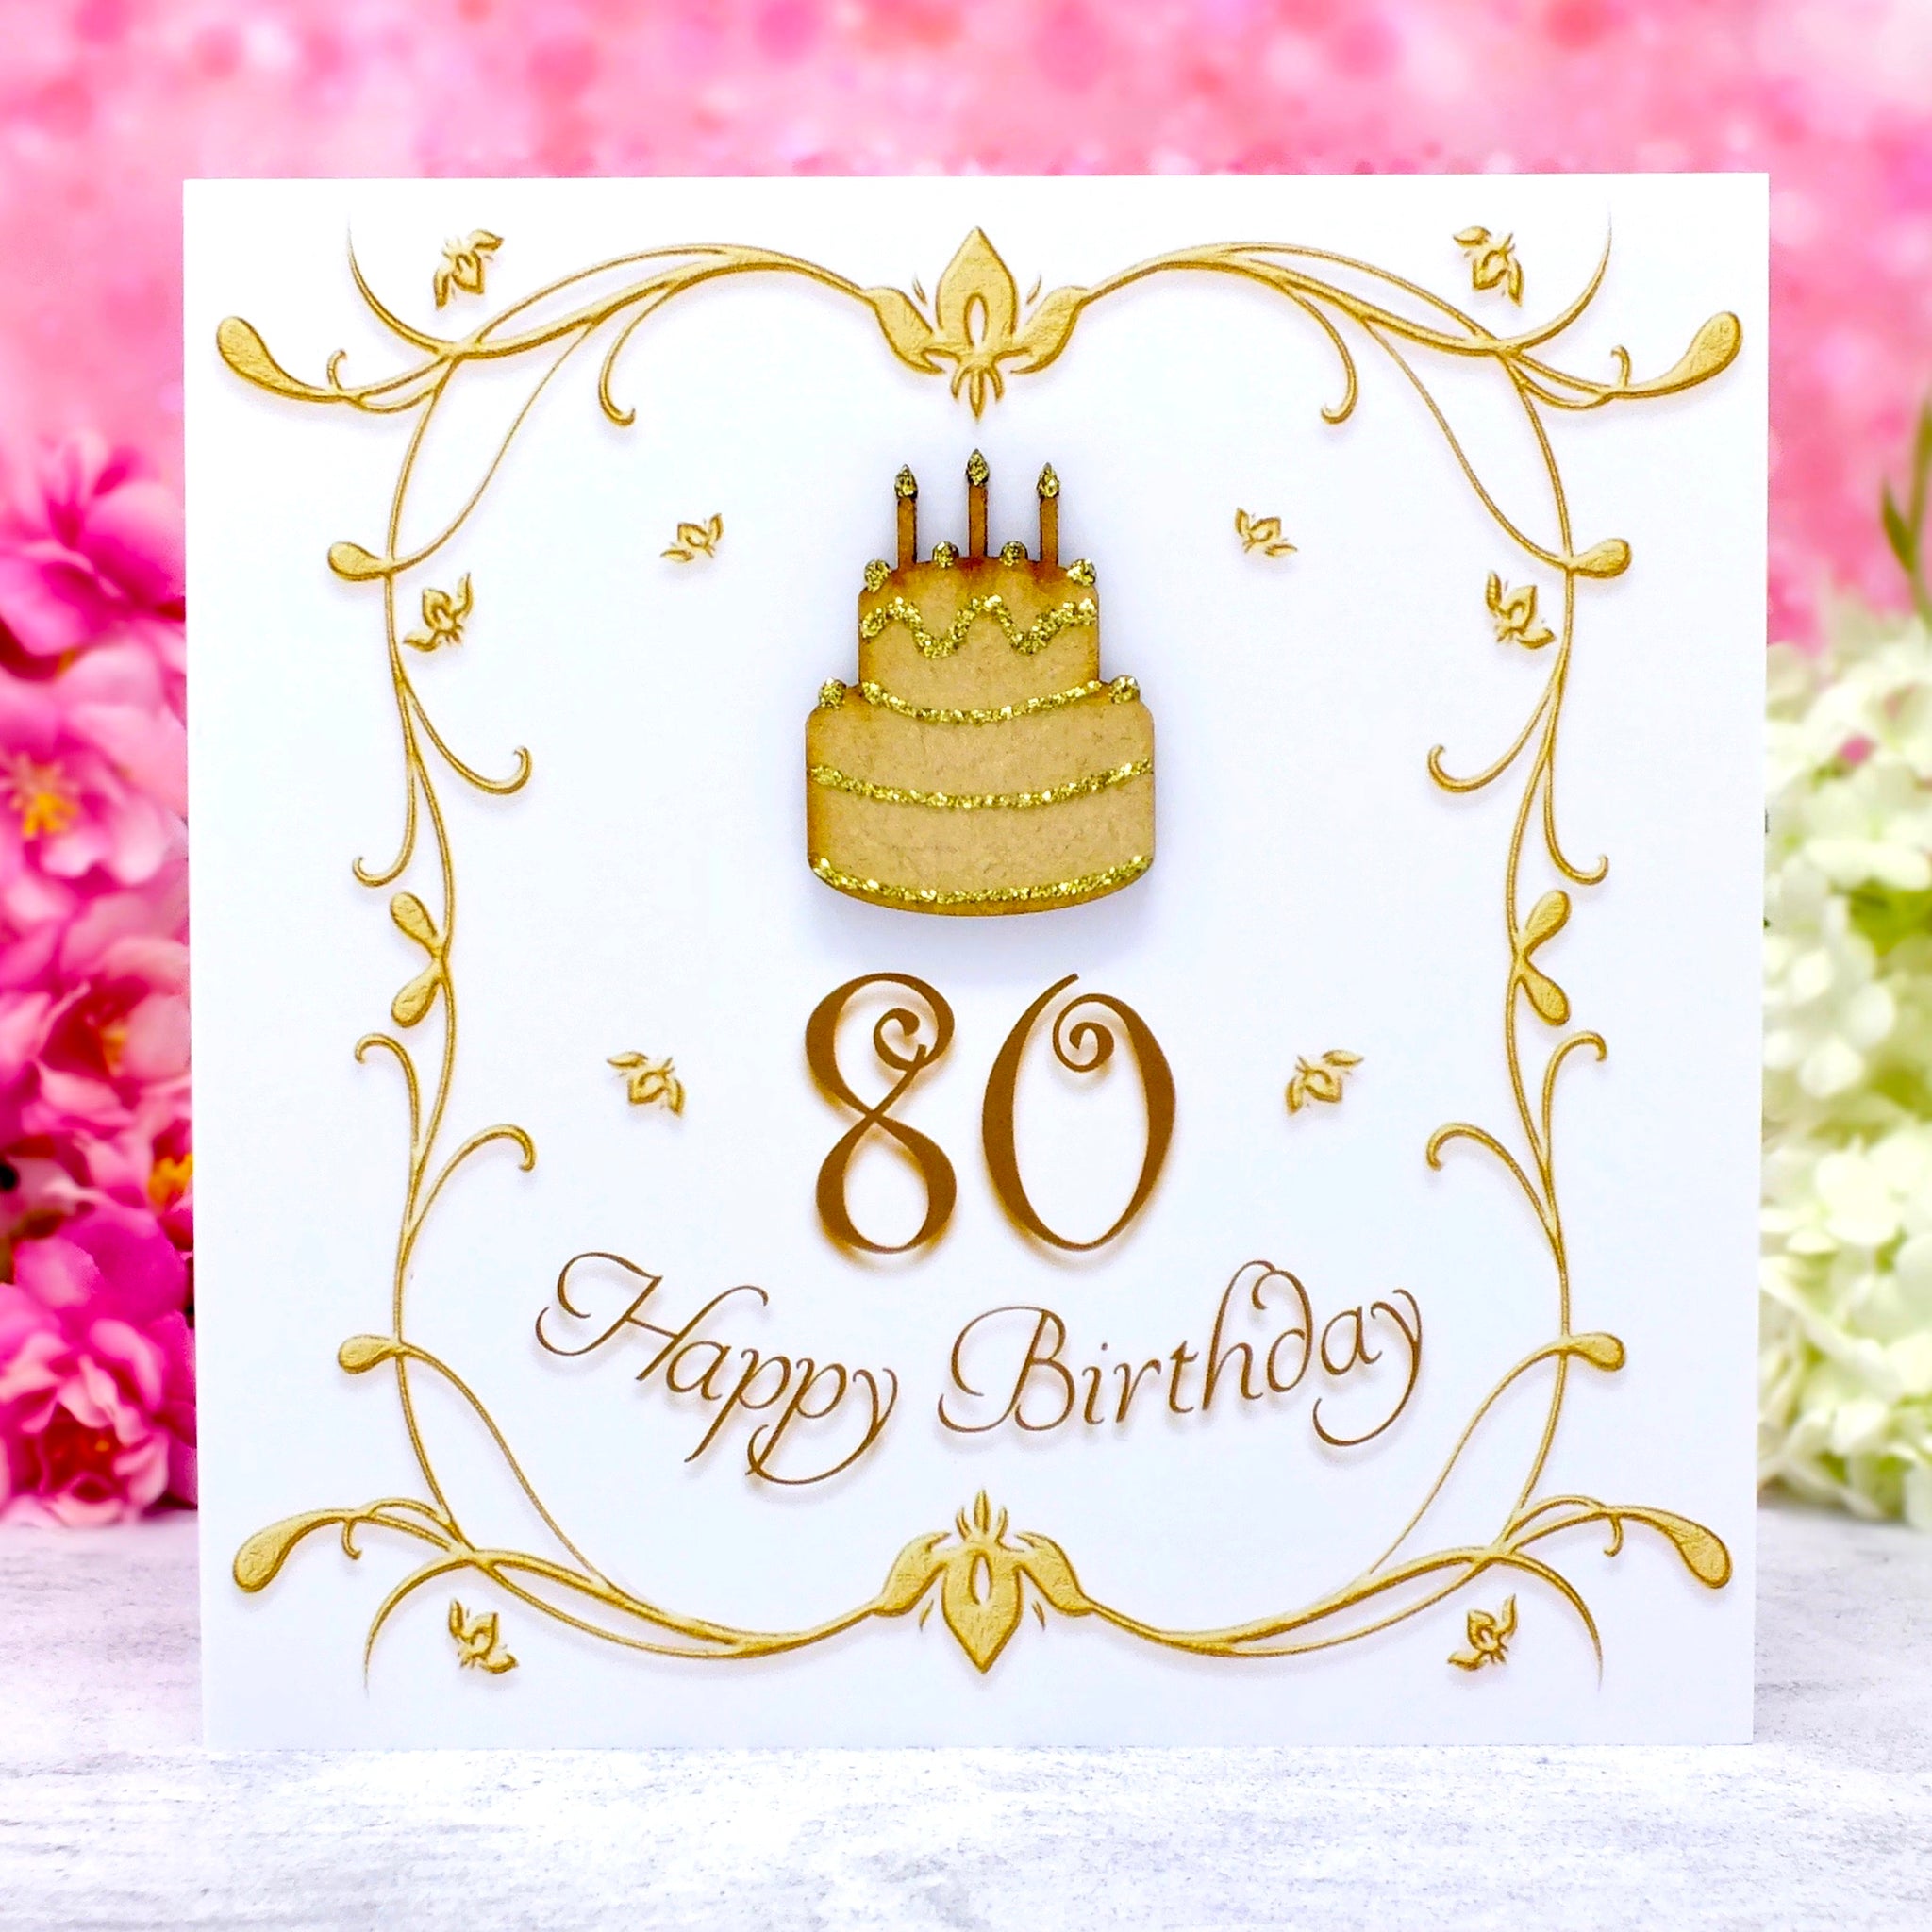 80th Birthday Cake - Buy Online, Free UK Delivery — New Cakes